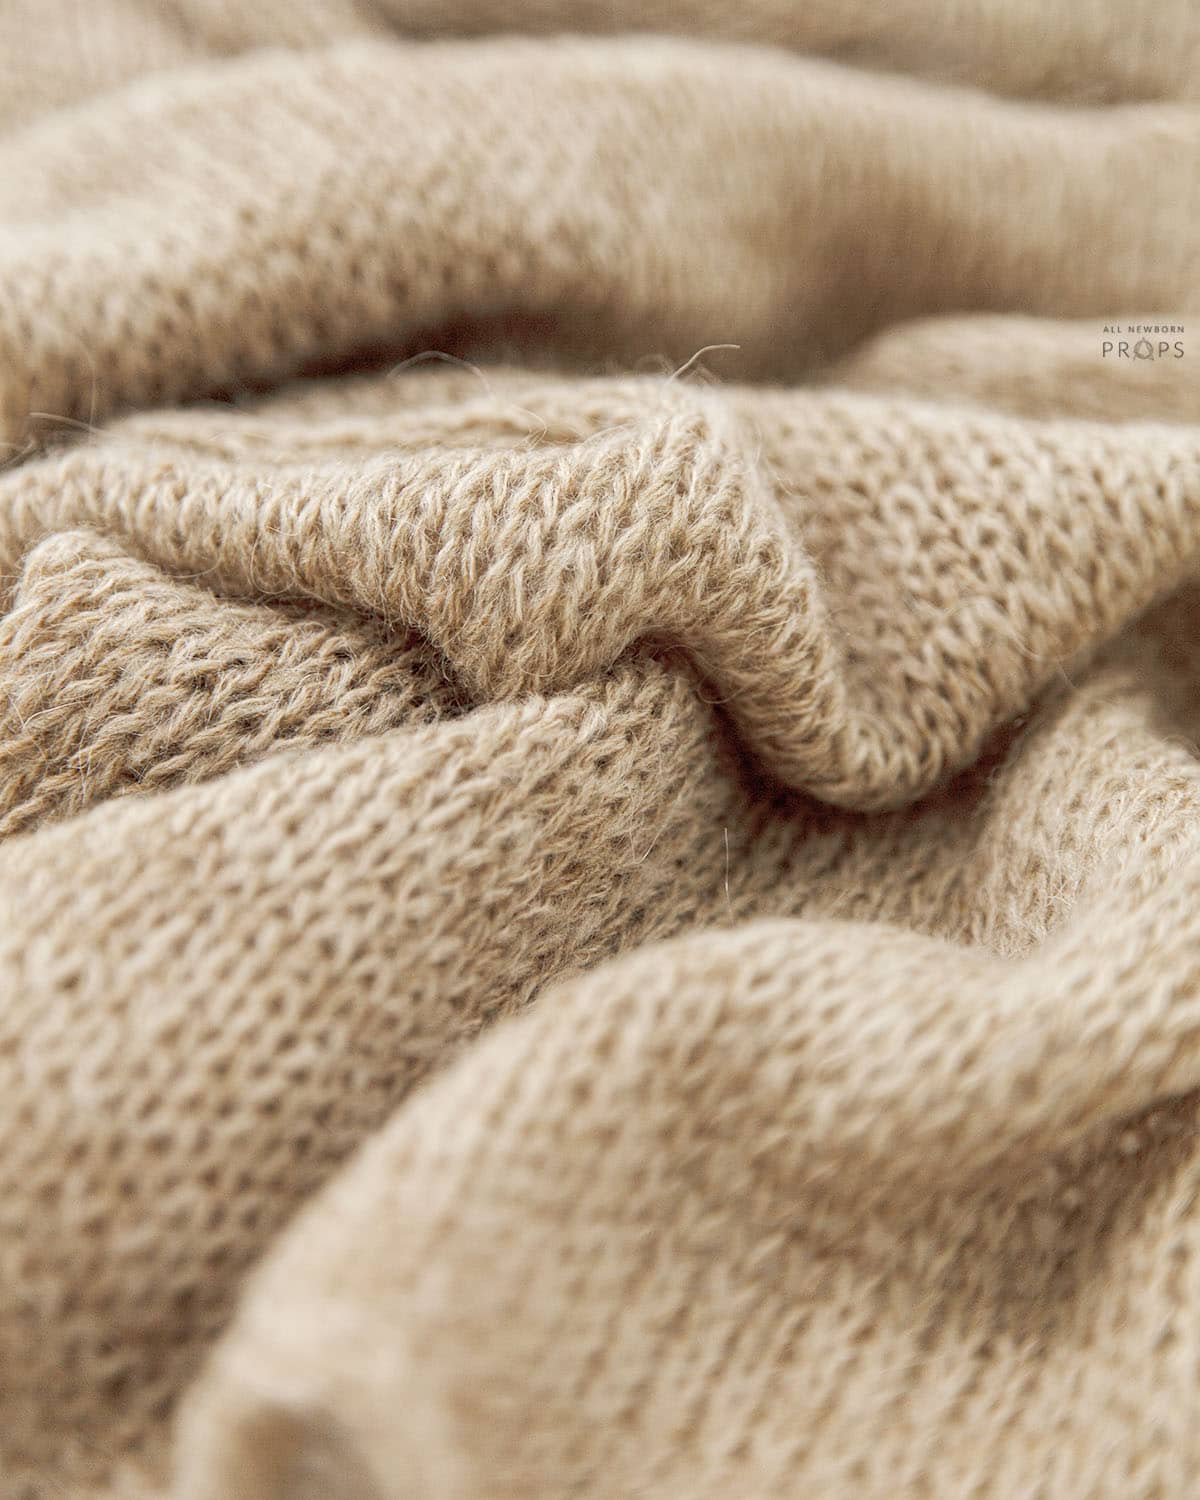 newborn-photography-wraps-stretchy-knitted-props-boy-neutral-camel-europe